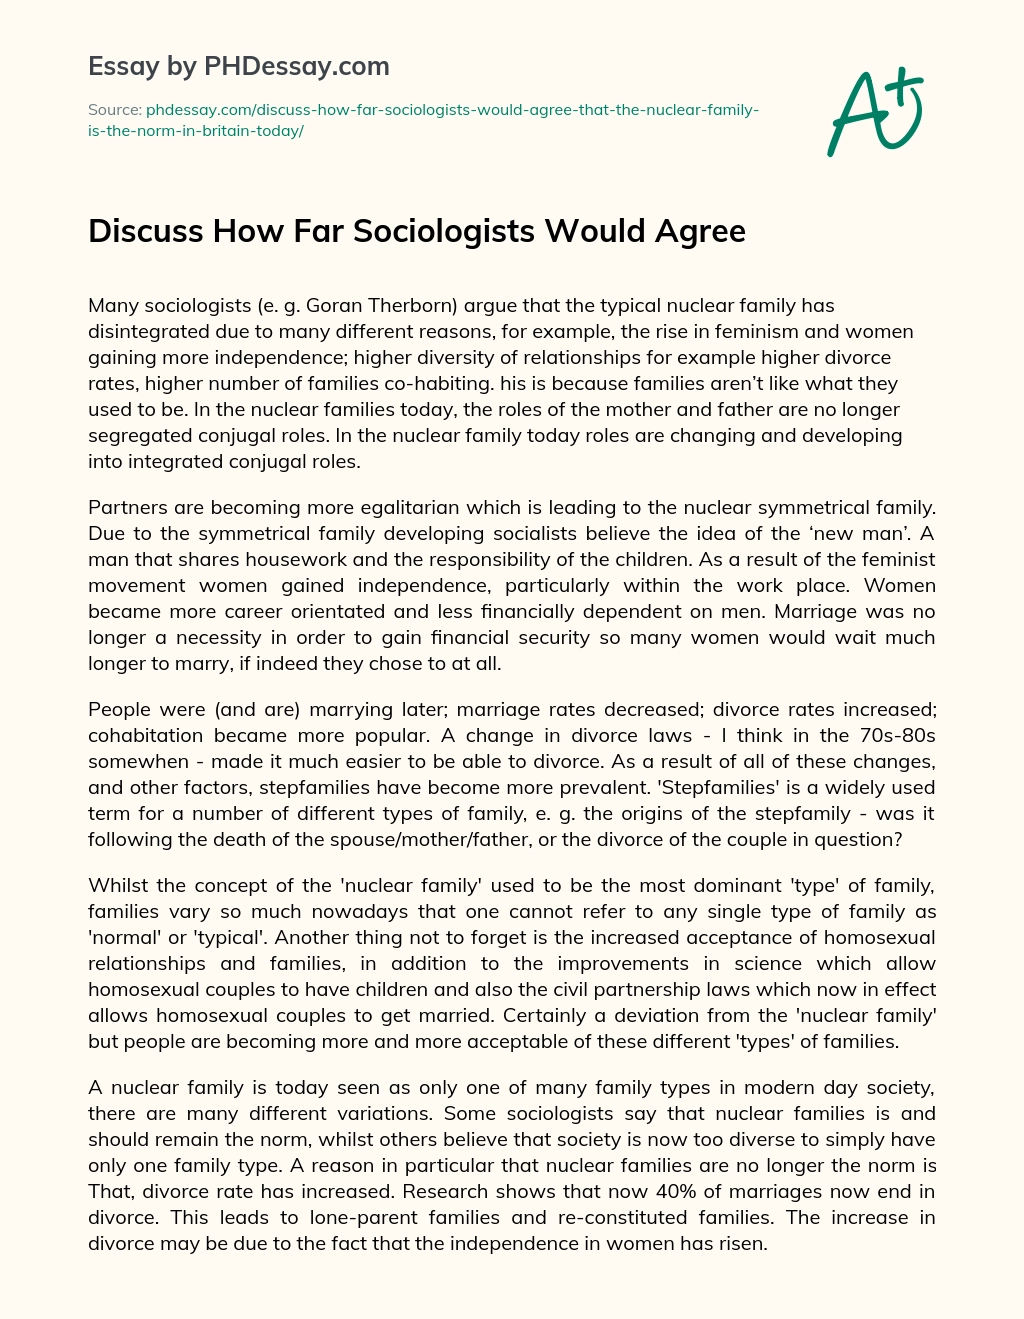 Discuss How Far Sociologists Would Agree essay